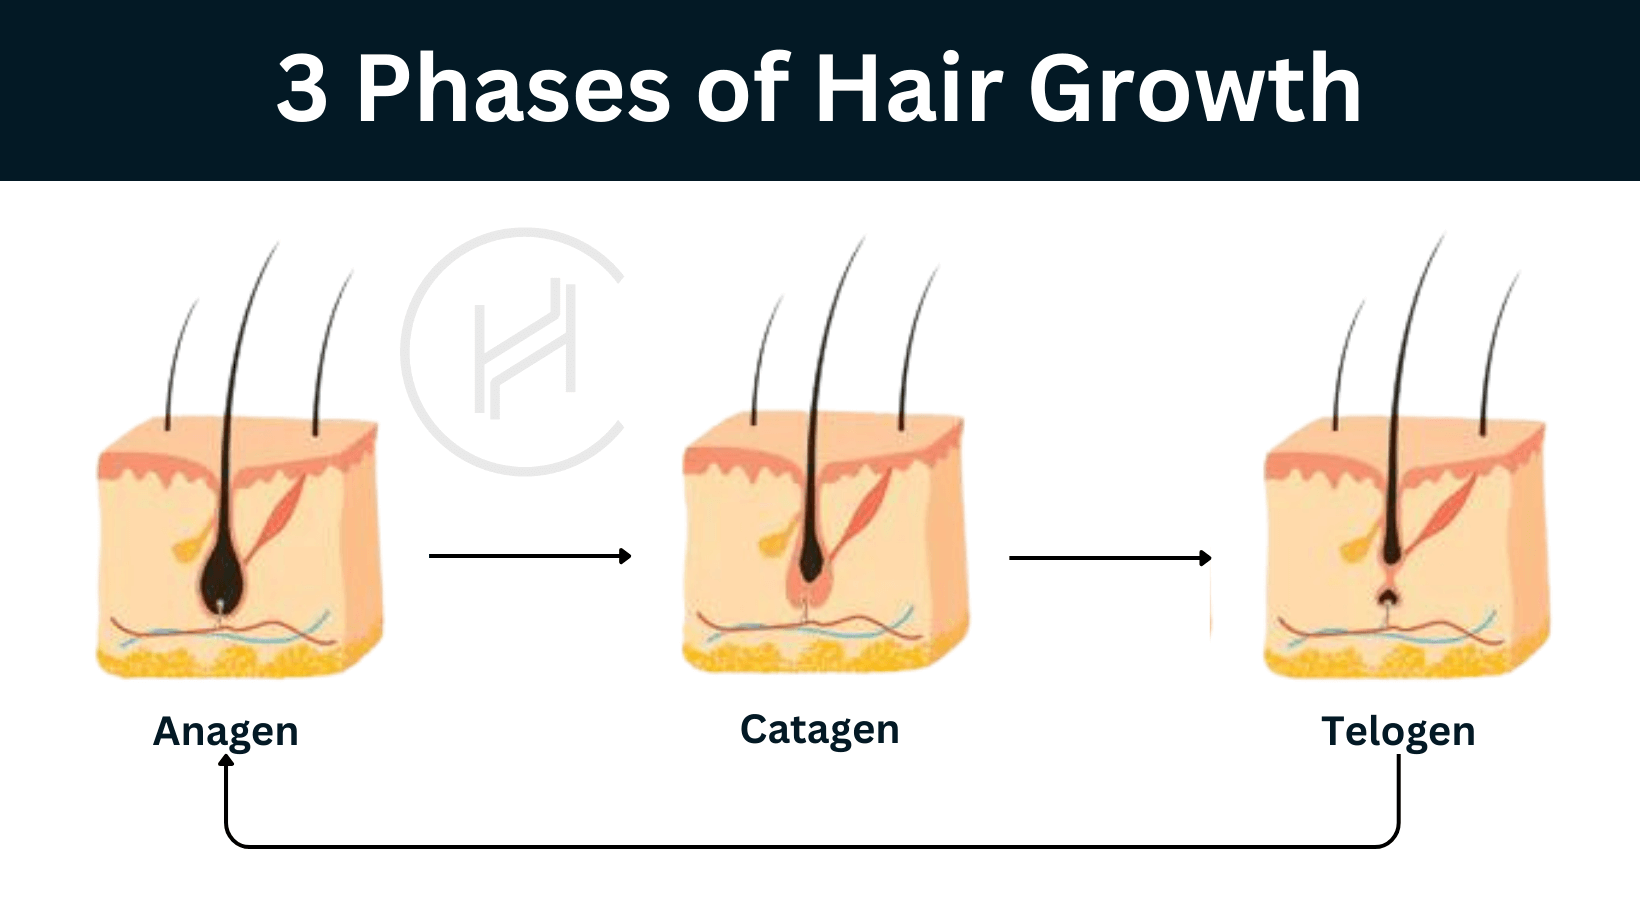 3 phases of hair growth